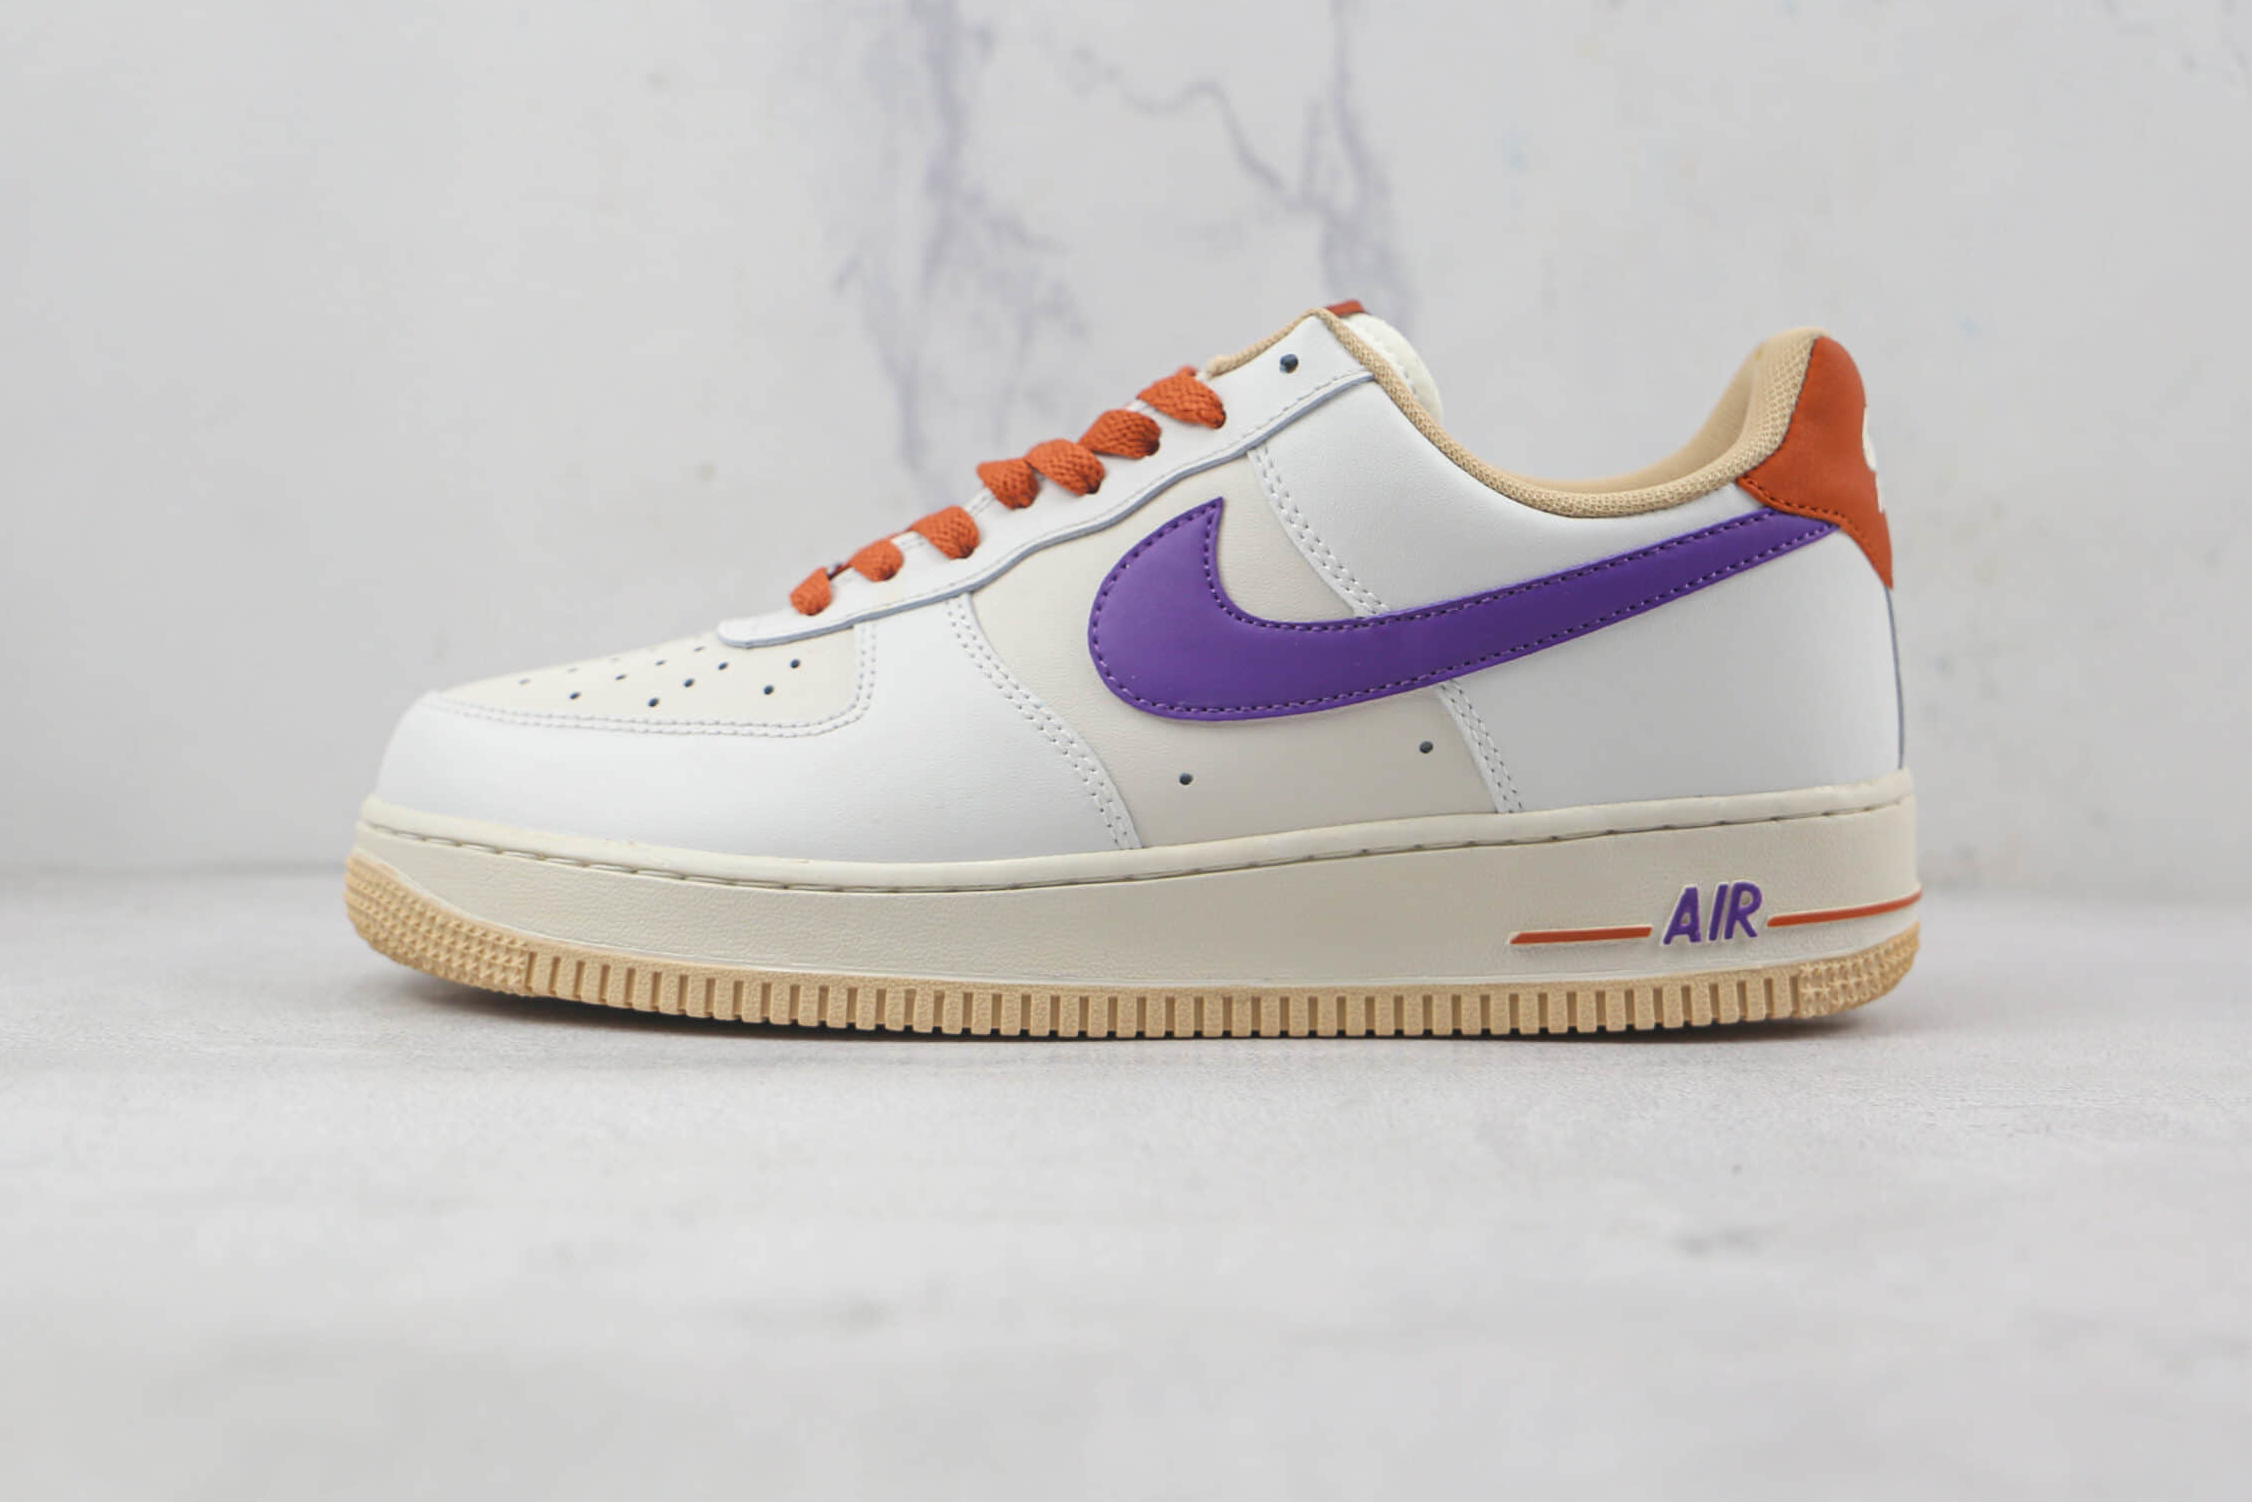 Nike Air Force 1 Low Beige Purple Orange White CW3388-205 - Stylish and Colorful Sneakers